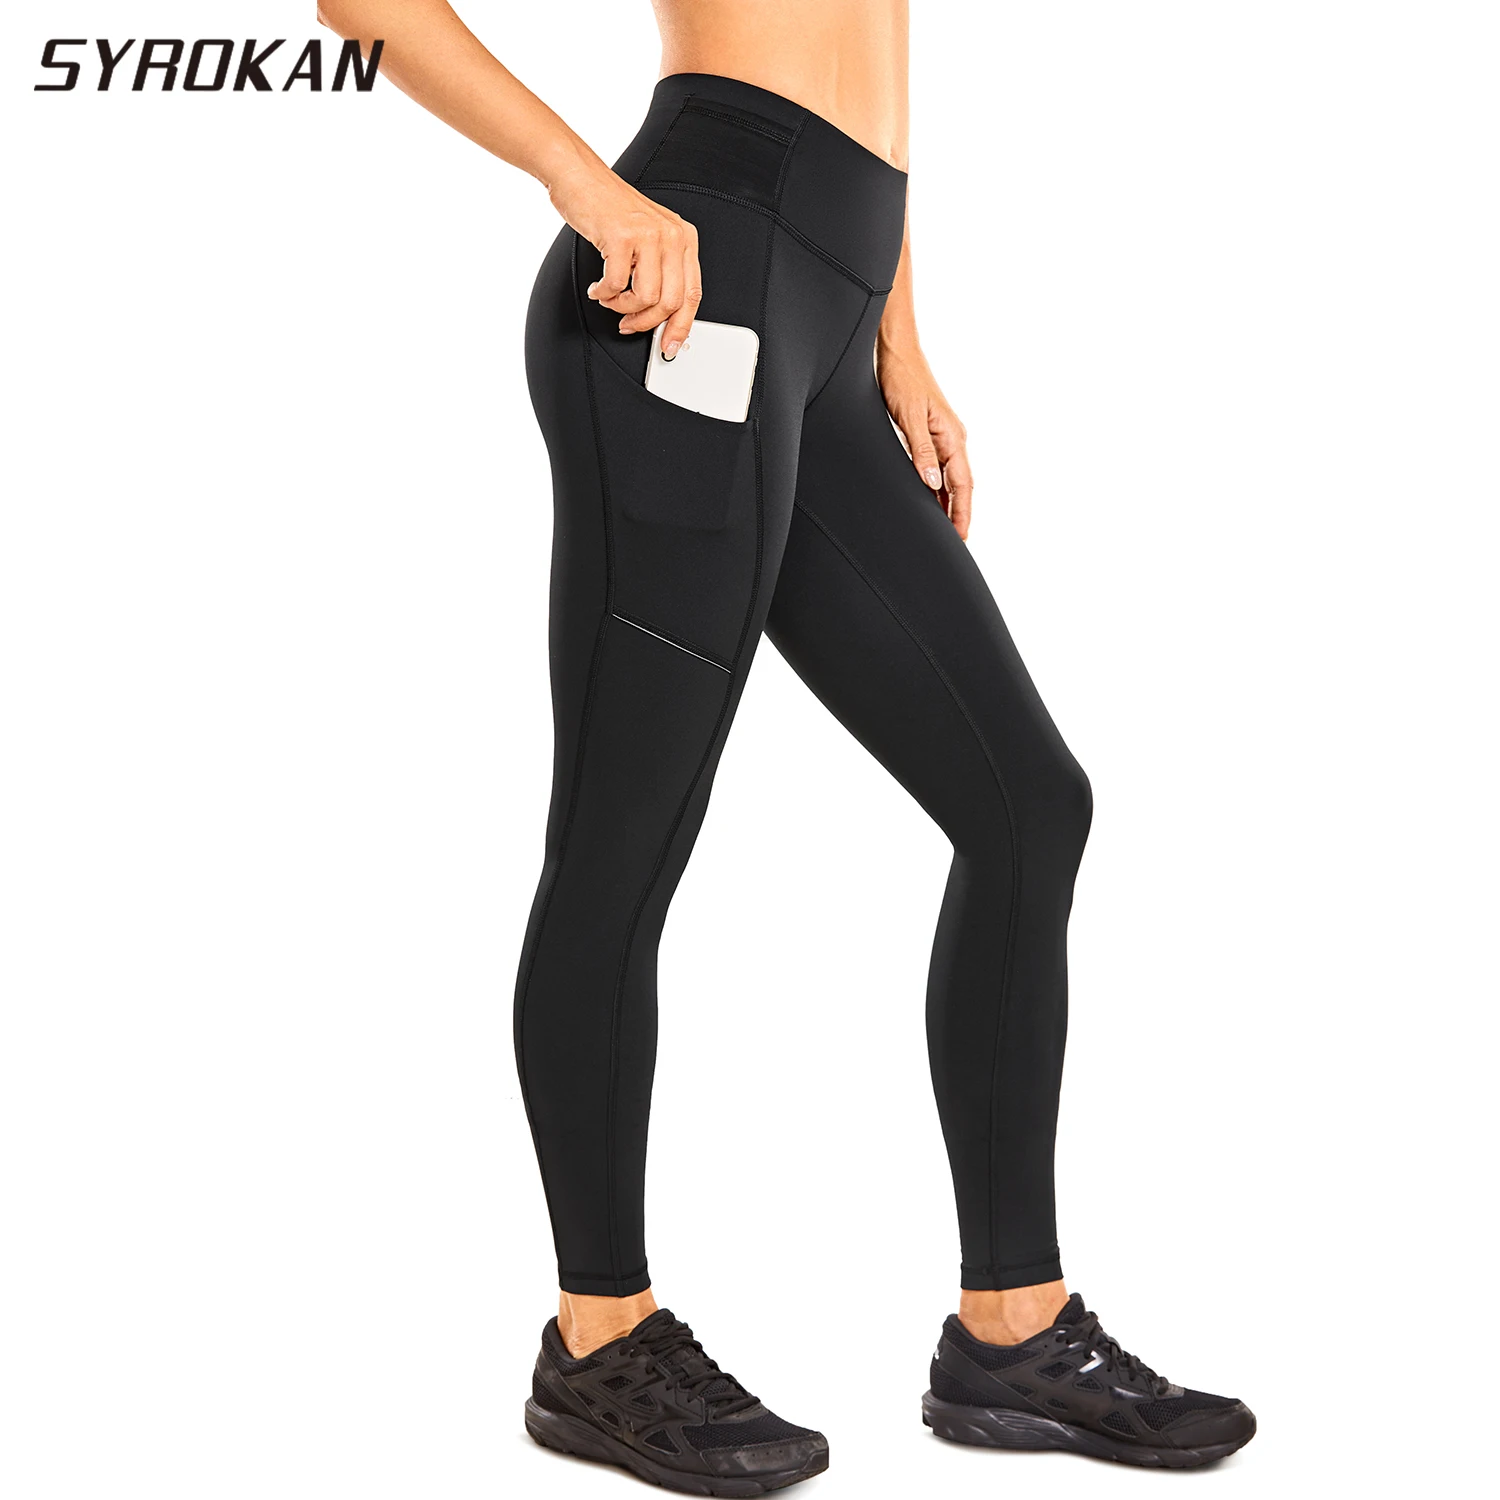 

SYROKAN Sport Leggings Women Skinny High-Waisted Tights Push Up Legging With Pockets Compression Hugged Feeling Solid Black 28"